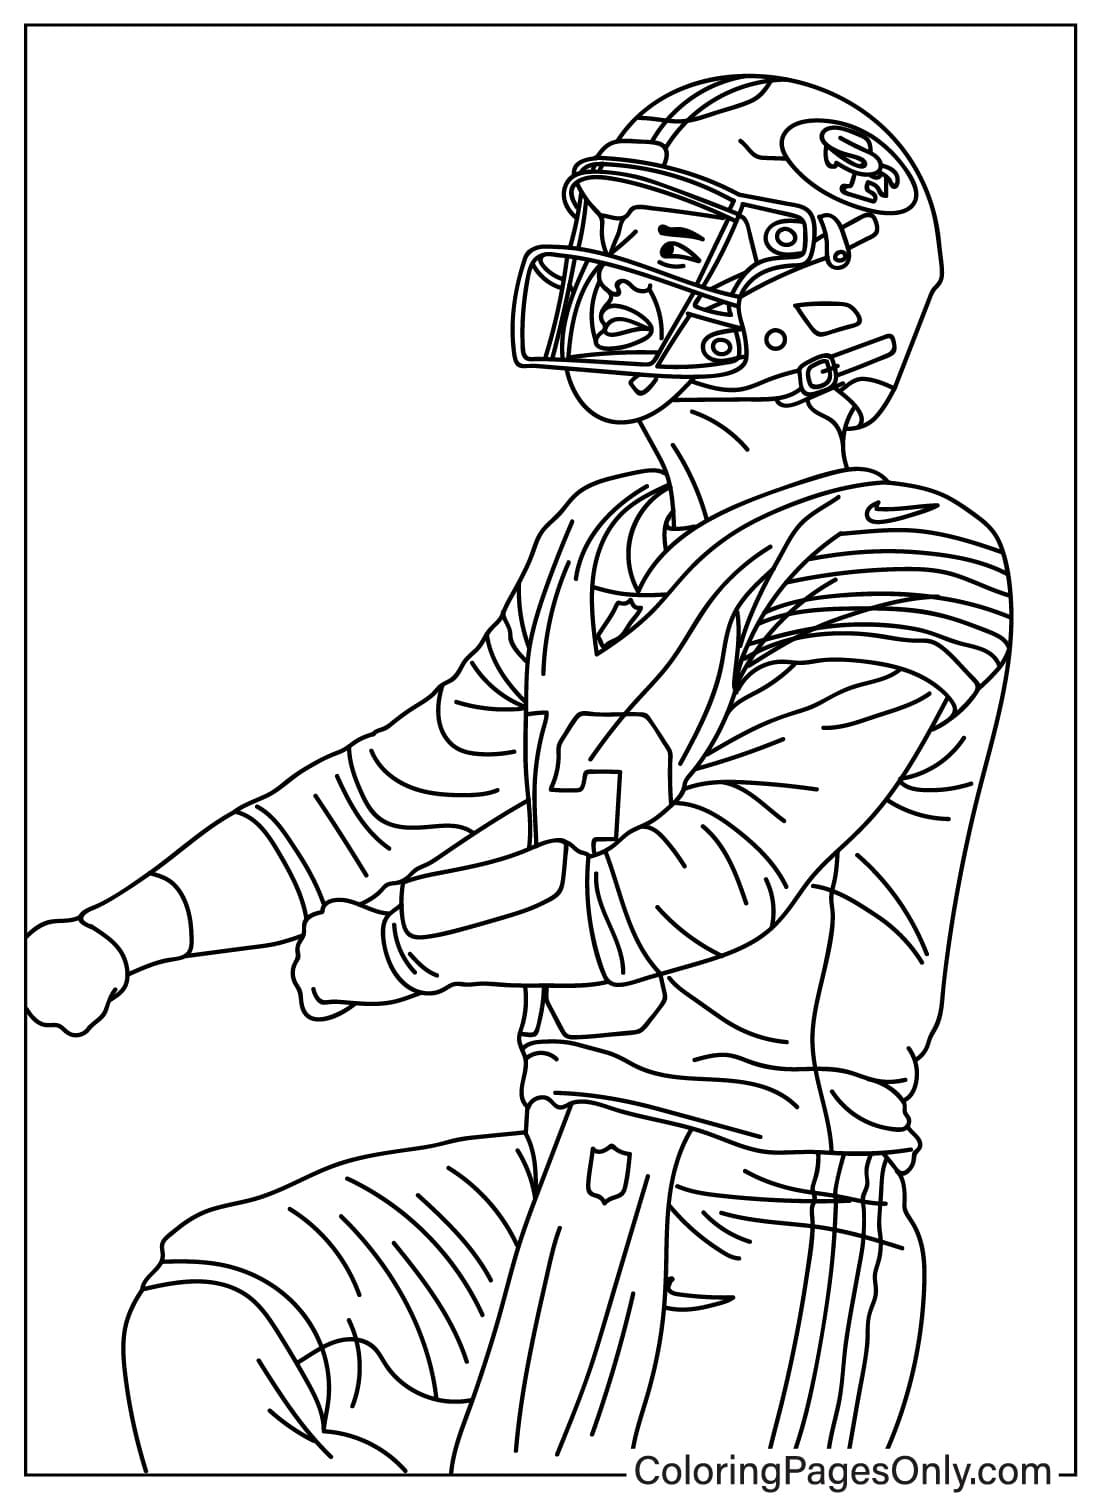 Brock Purdy Coloring Page from San Francisco 49ers